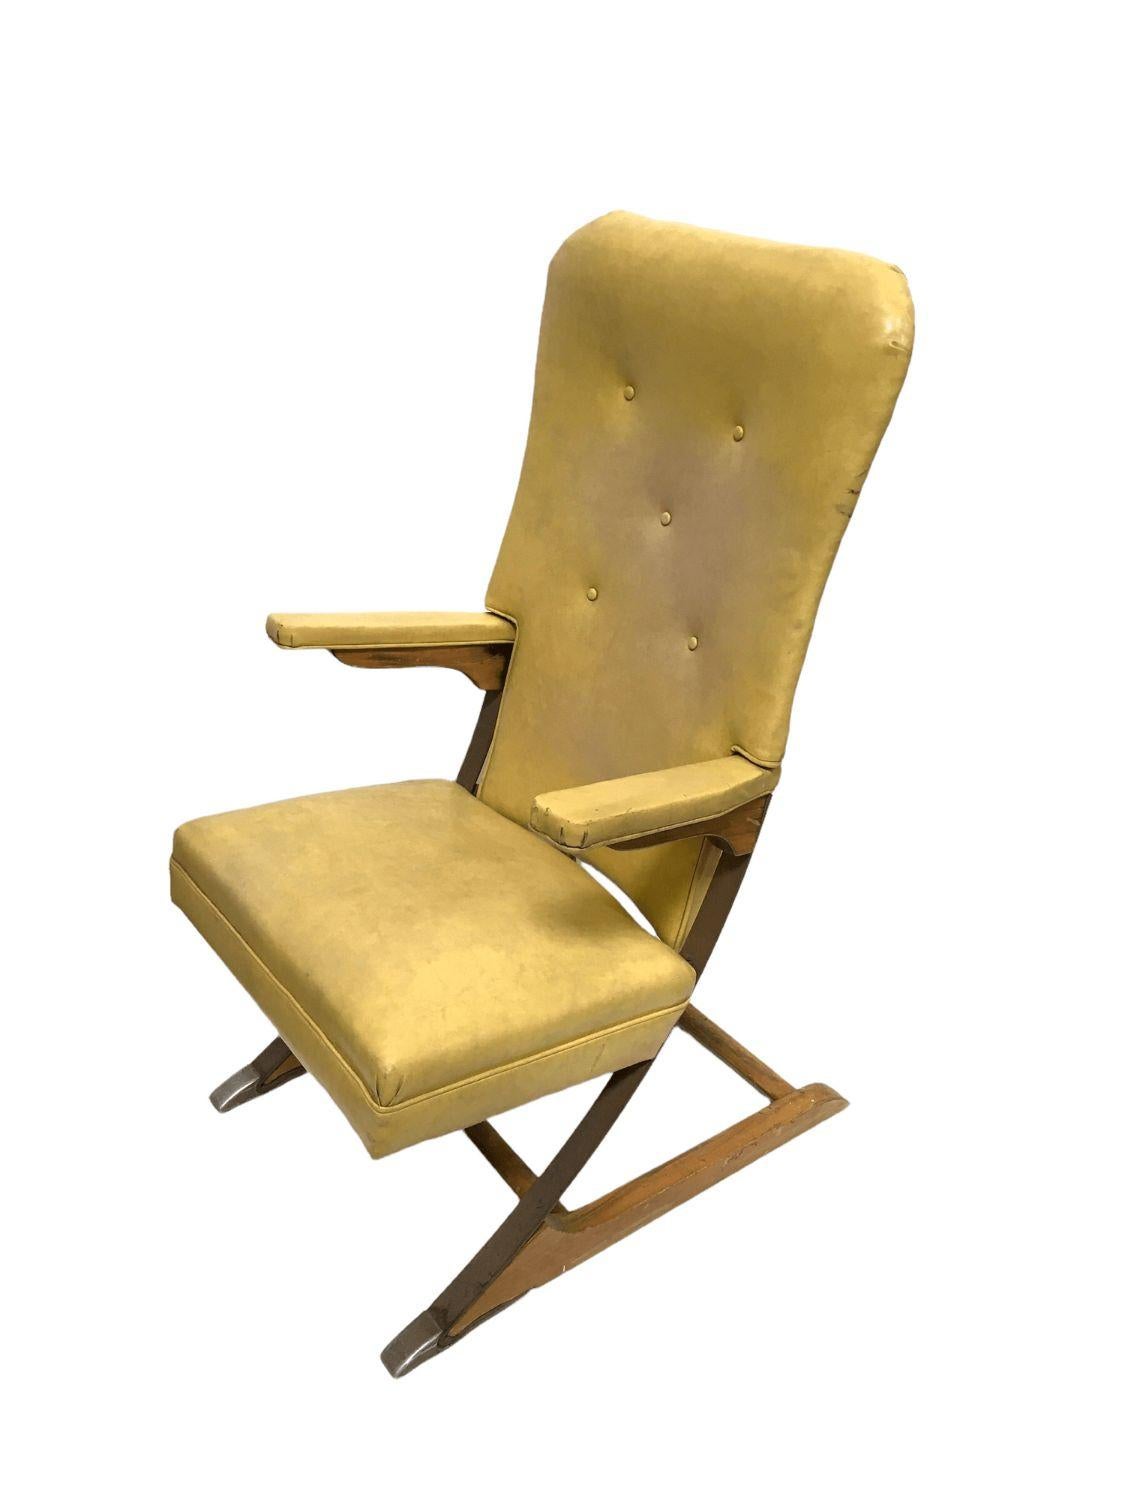 Mid-Century Modern Vintage Rock-a-Chair Cantilever Rocker Chair in Harvest Gold Vinyl For Sale